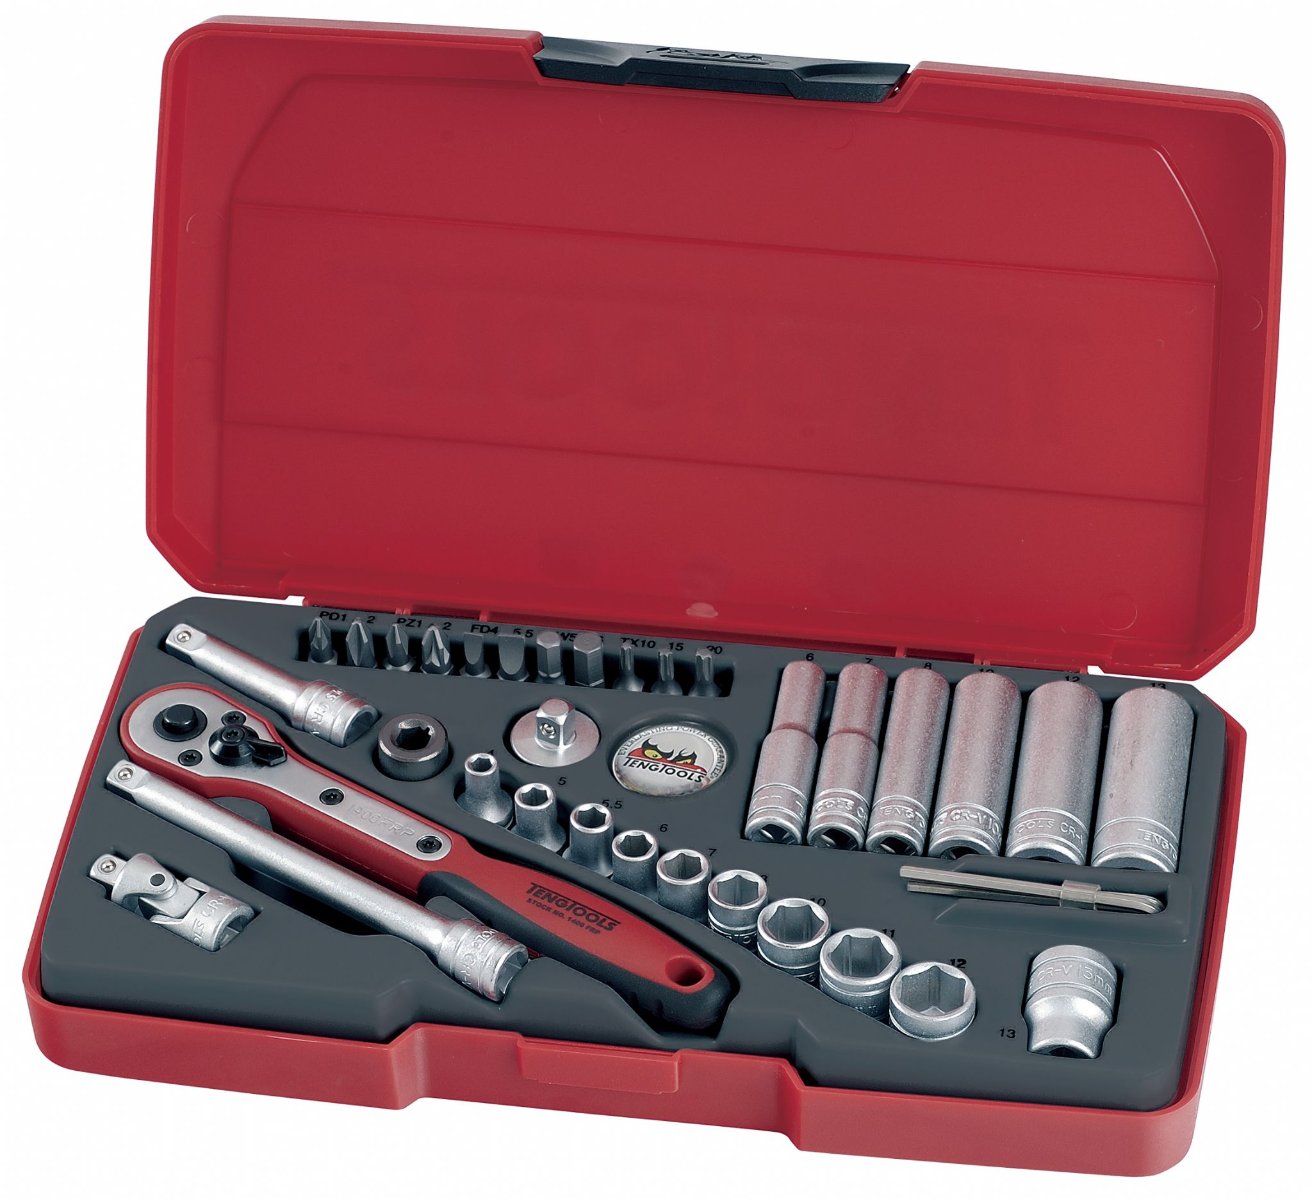 Teng Tools T1436 36 Piece 1/4" Drive Metric Deep and short Socket Set in storage case